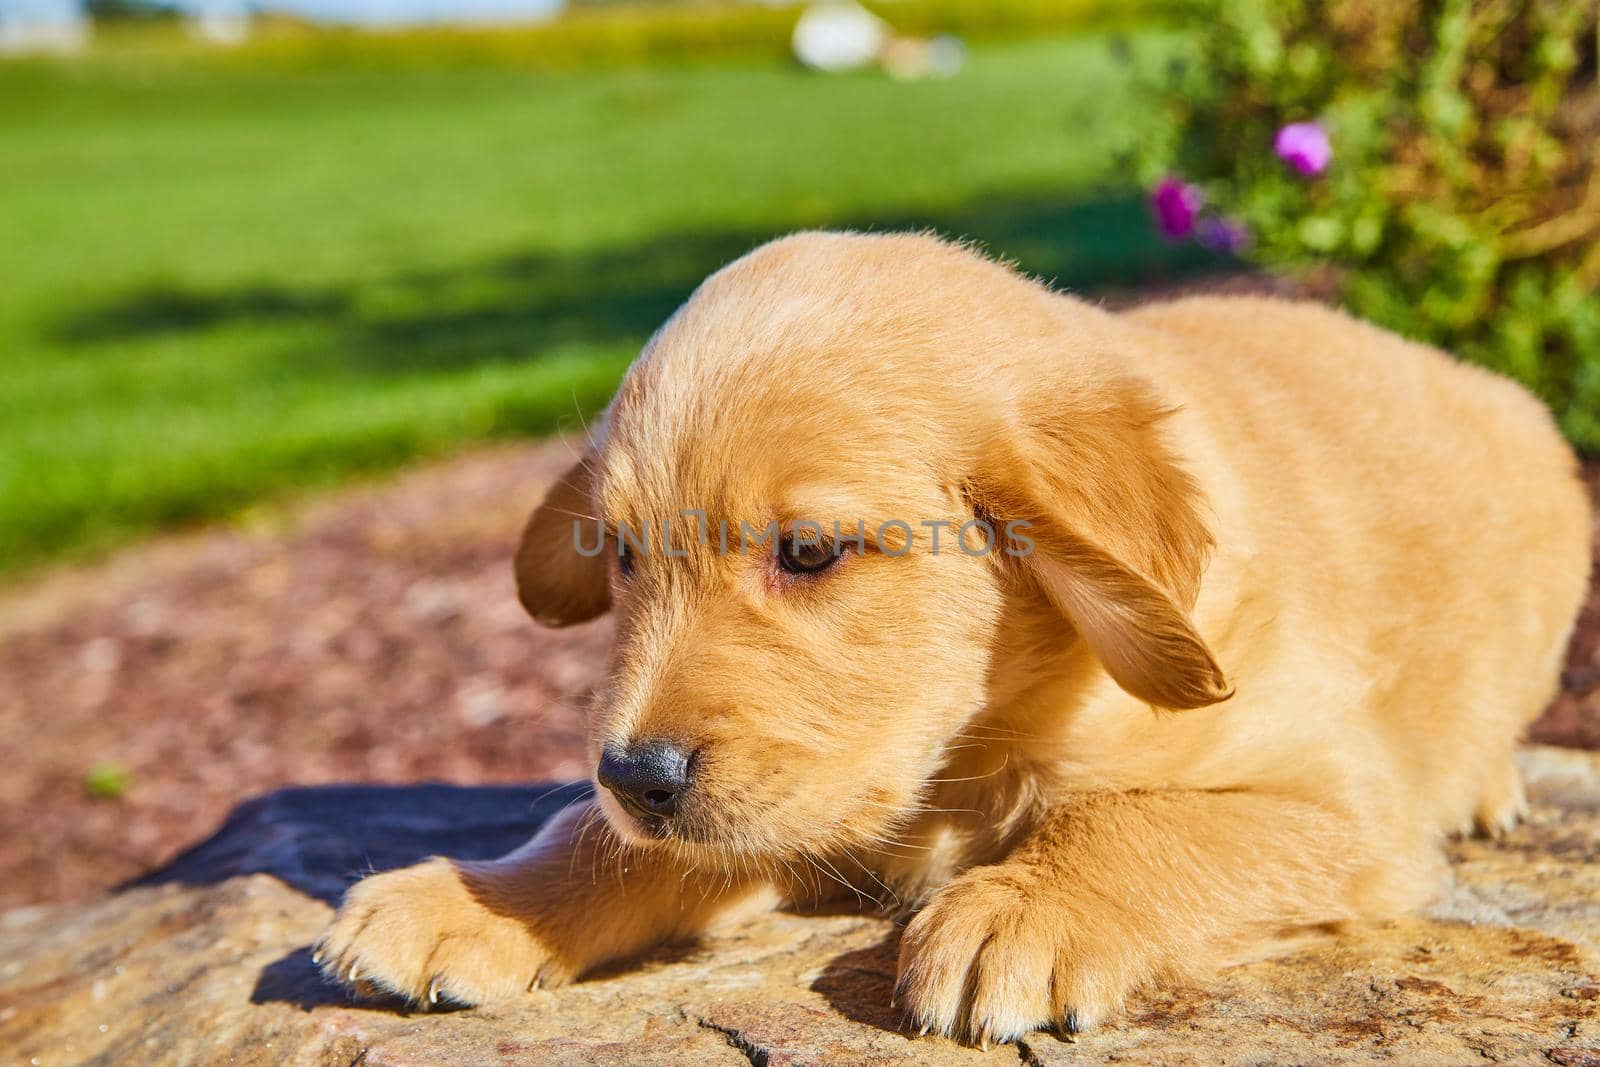 Adorable golden retriever puppy resting on rock with field of grass in background by njproductions